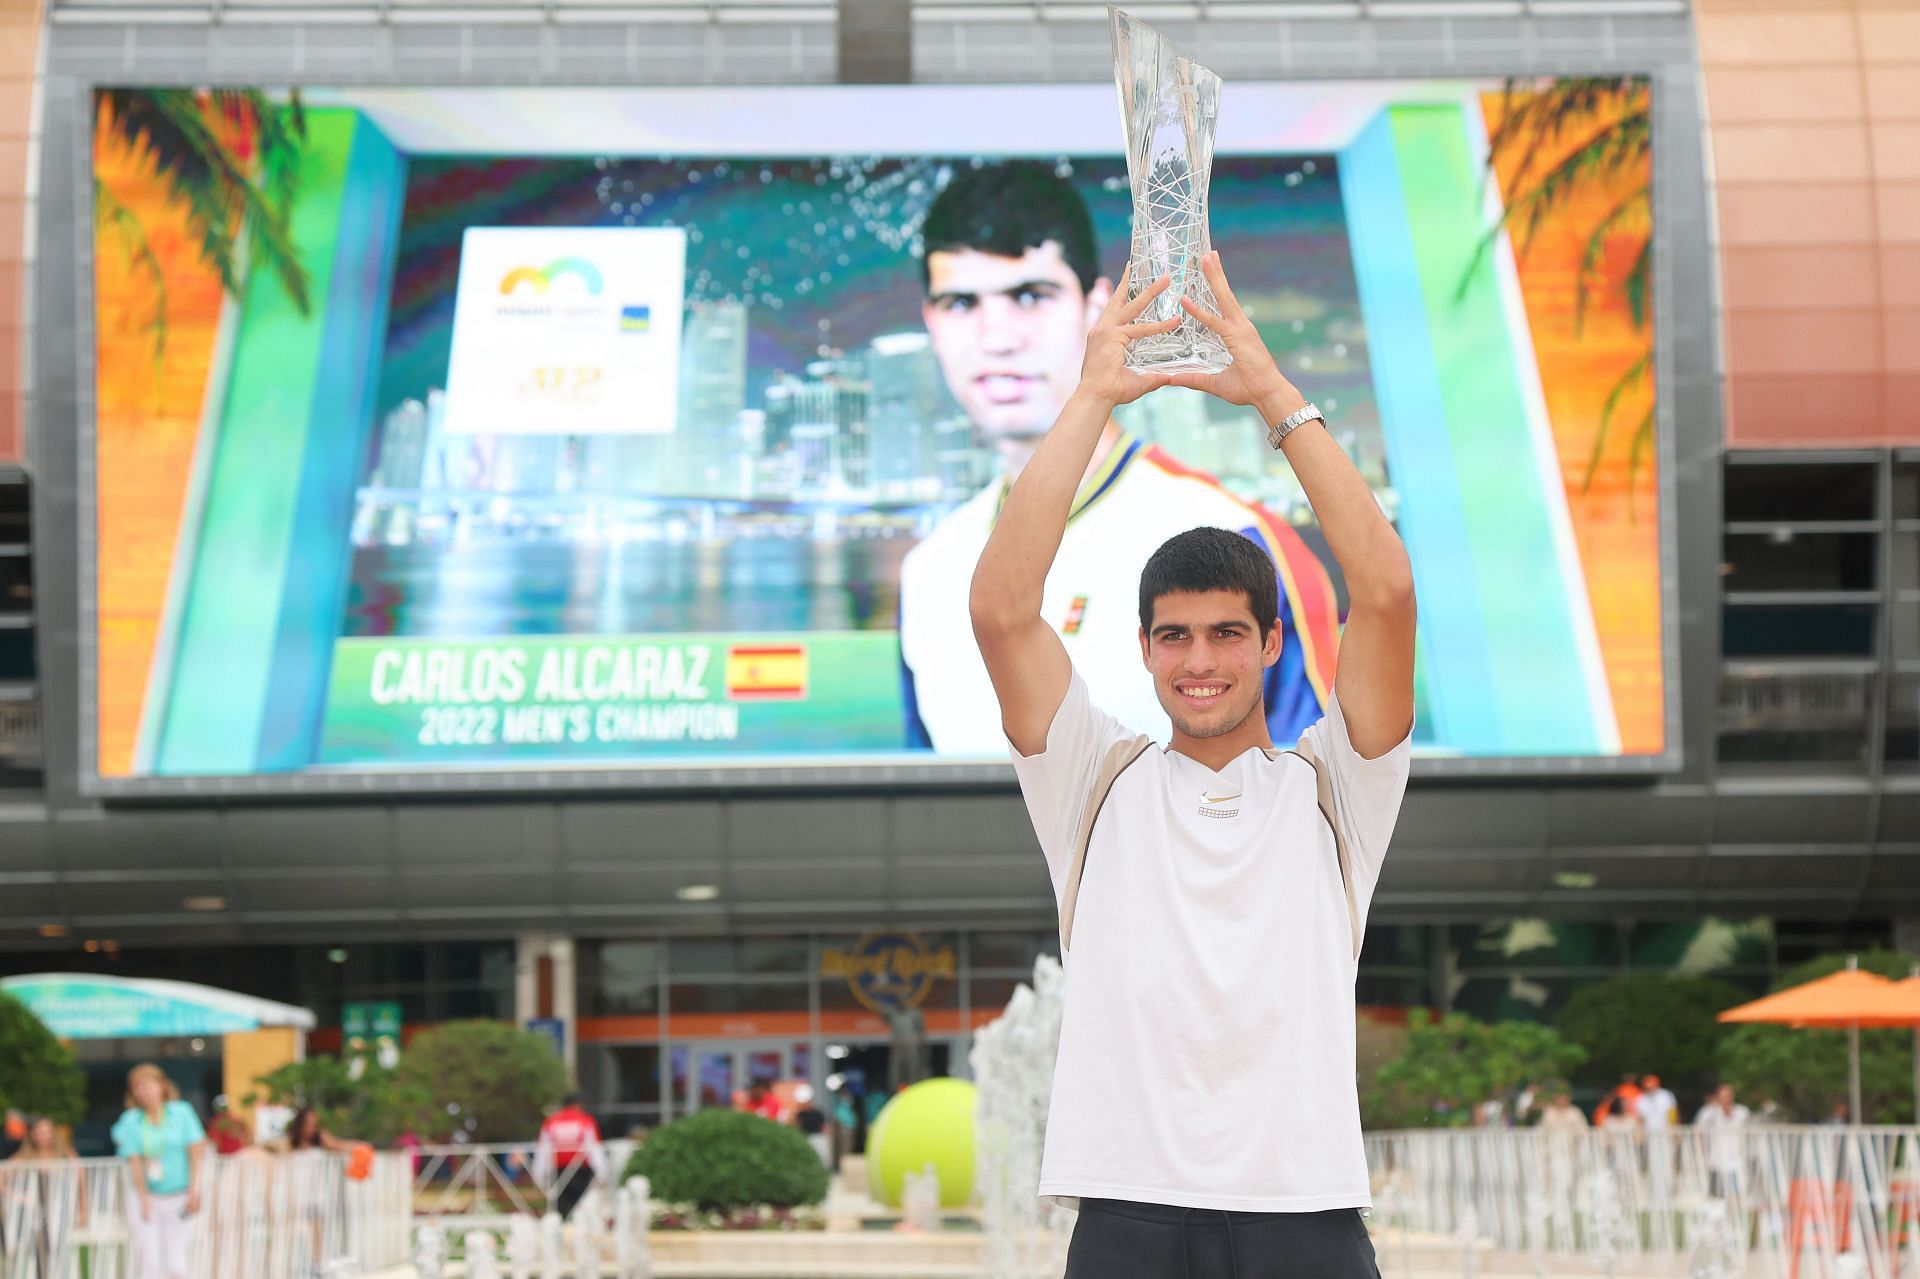 Carlos Alcaraz celebrates with the Butch Buchholz Trophy after winning the 2022 Miami Open